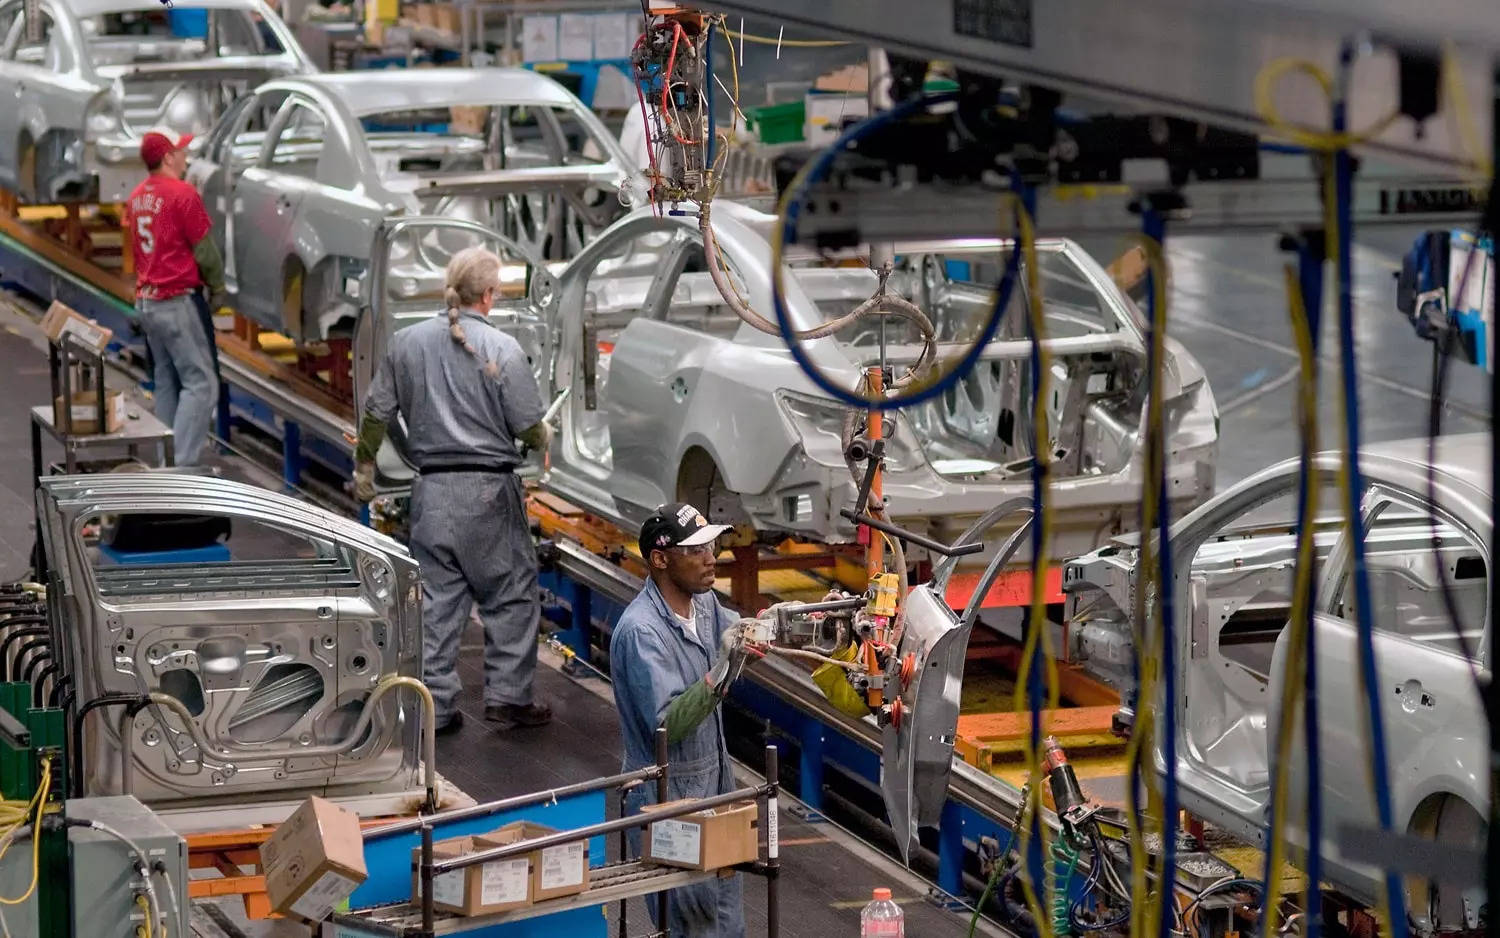  Russia will also significantly reduce its environmental standards for cars, the Kommersant business daily said in its Monday edition, bringing them back to standards for vehicles produced in 1988.